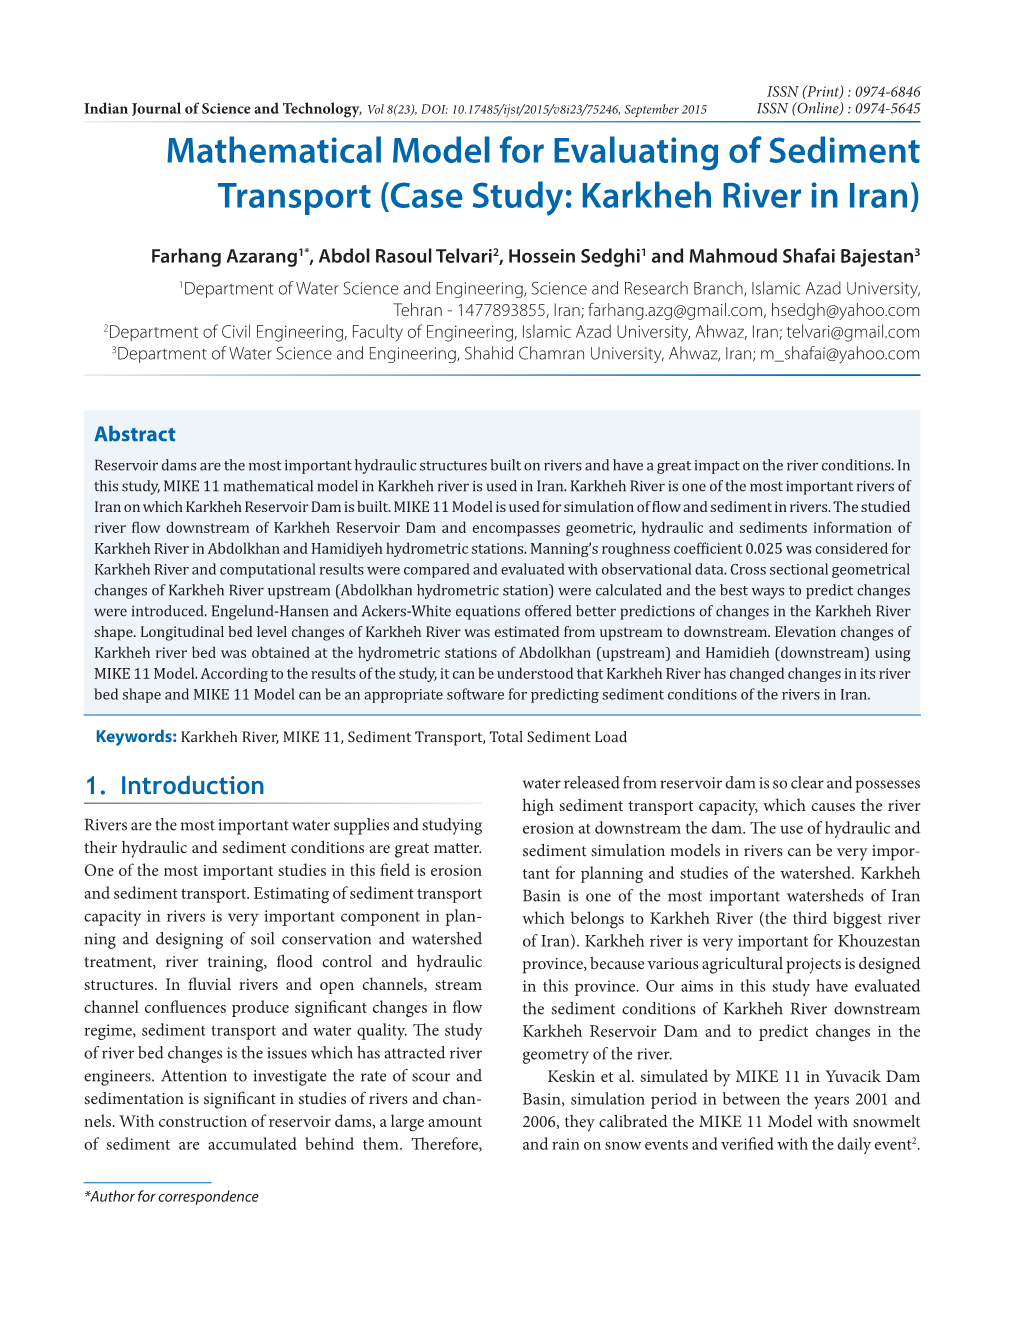 Mathematical Model for Evaluating of Sediment Transport (Case Study: Karkheh River in Iran)